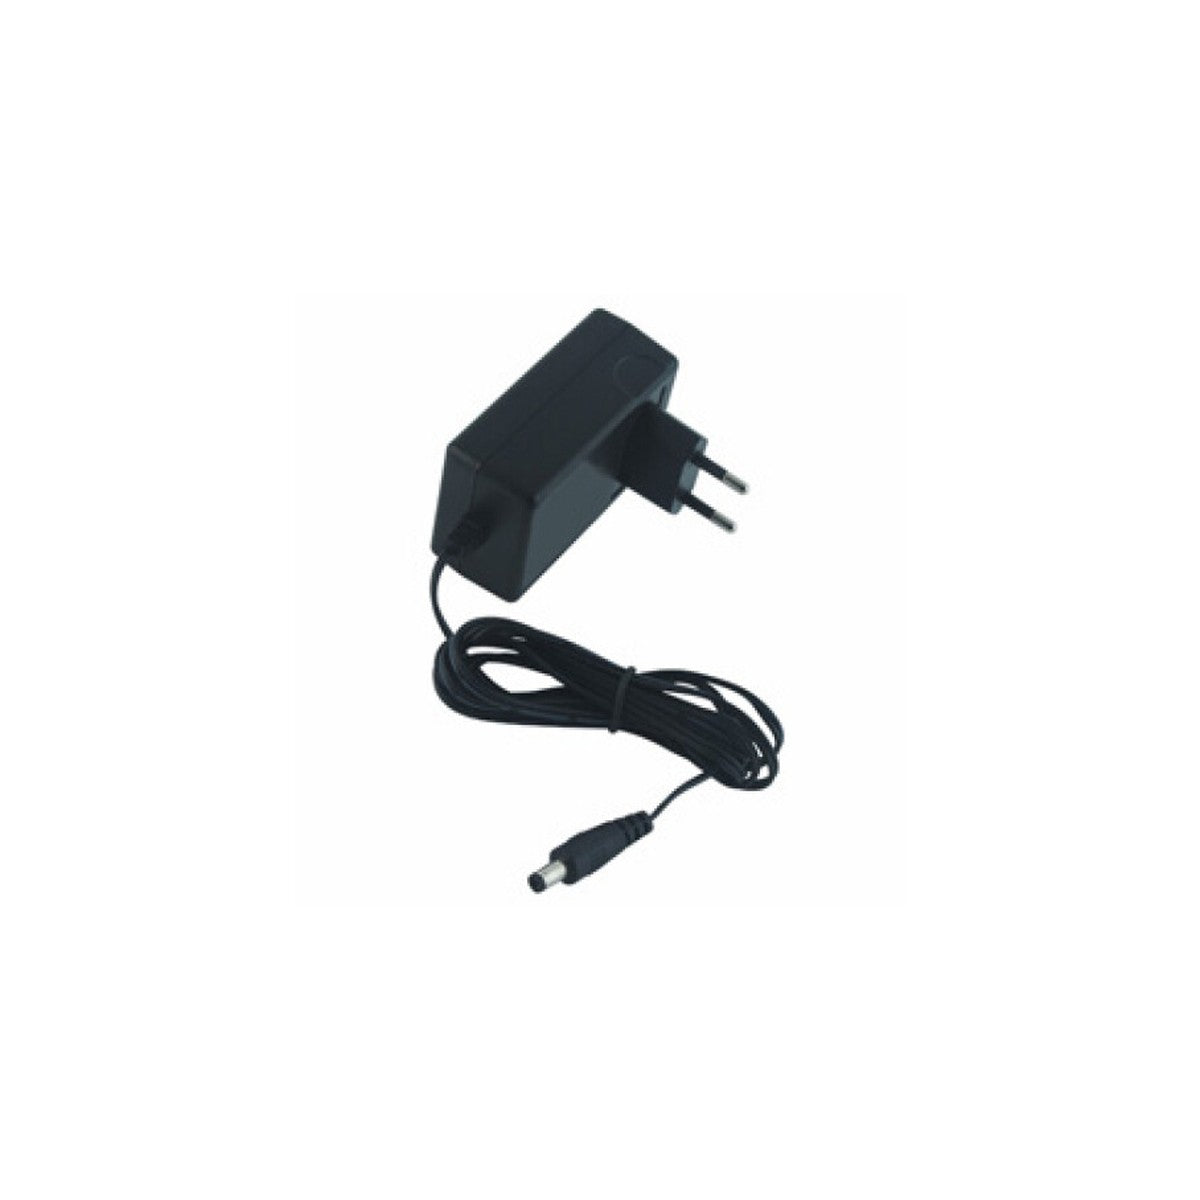 TRASFORMATORE AC ADAPTER EU SUPPLY POWER - IN 100-240V - OUT 12V DC / 1.5 A